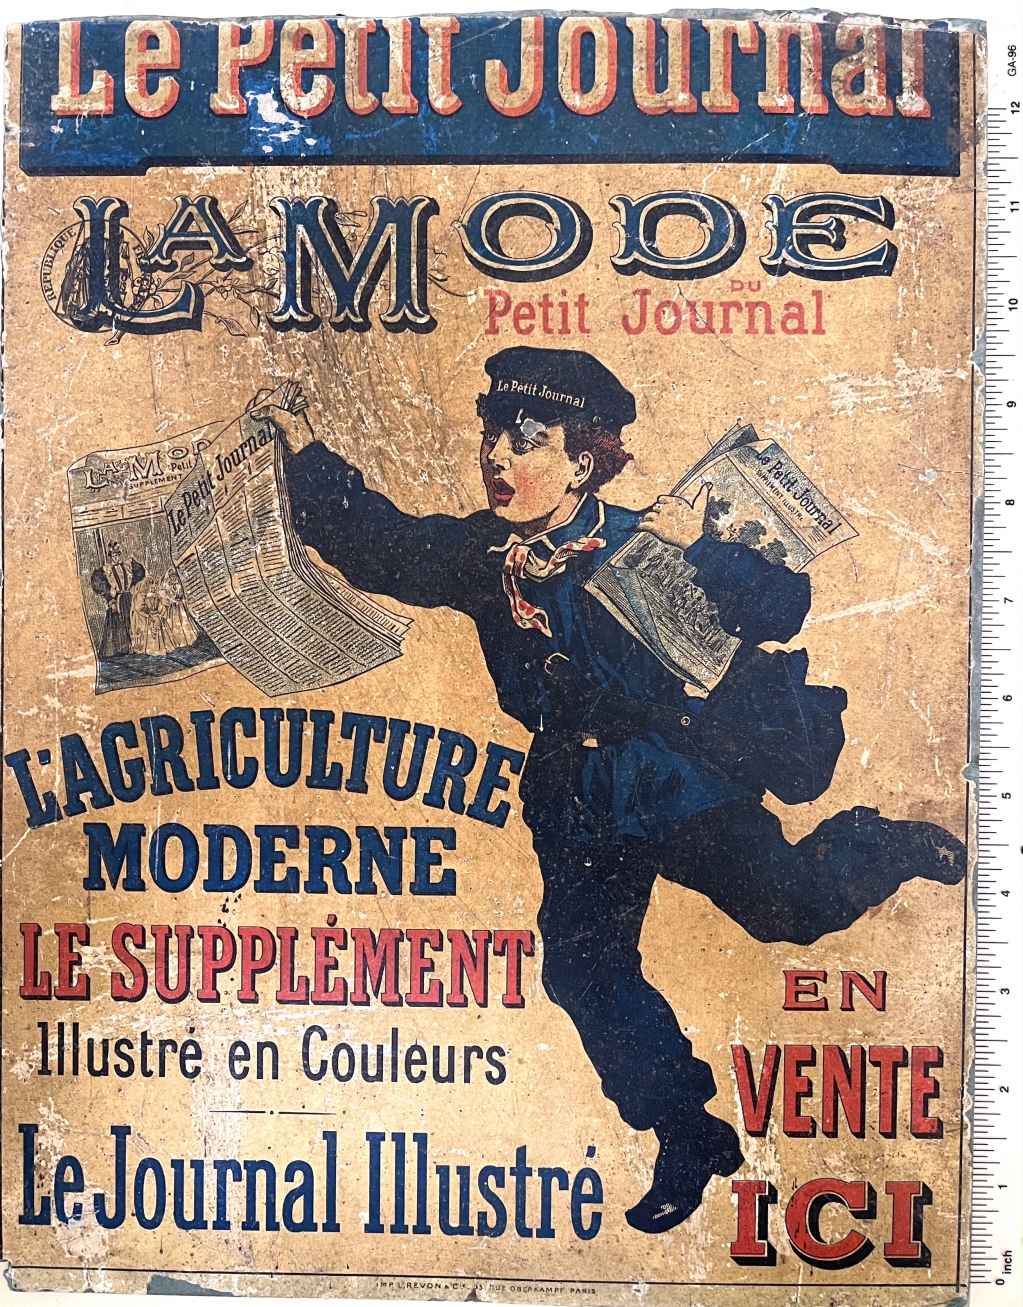 Street vendor sign for Le Petit Journal, circa 1900. Note the special uniform worn by the newsboy.